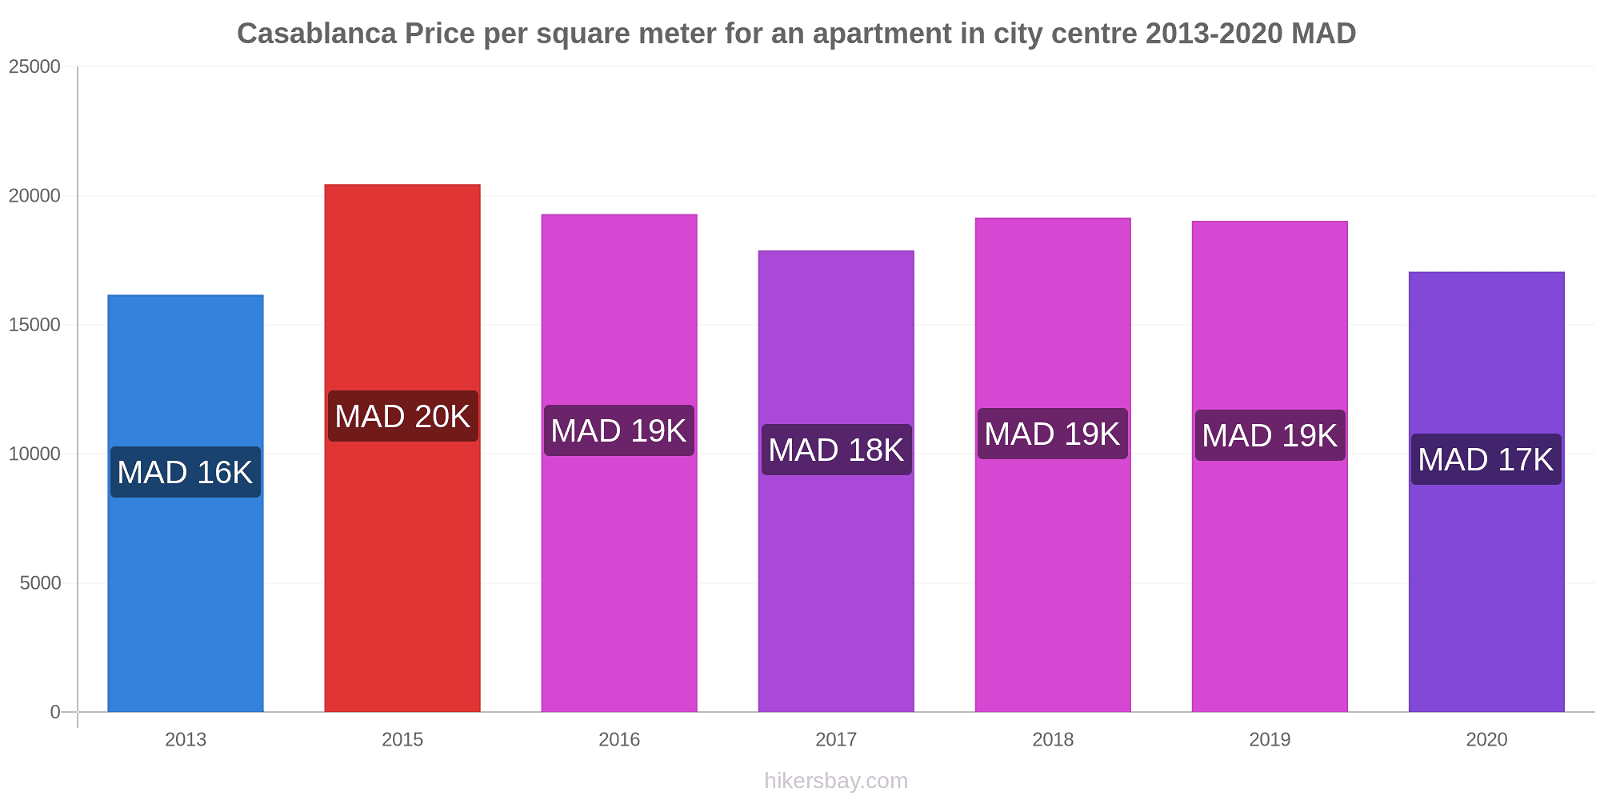 Casablanca price changes Price per square meter for an apartment in city centre hikersbay.com